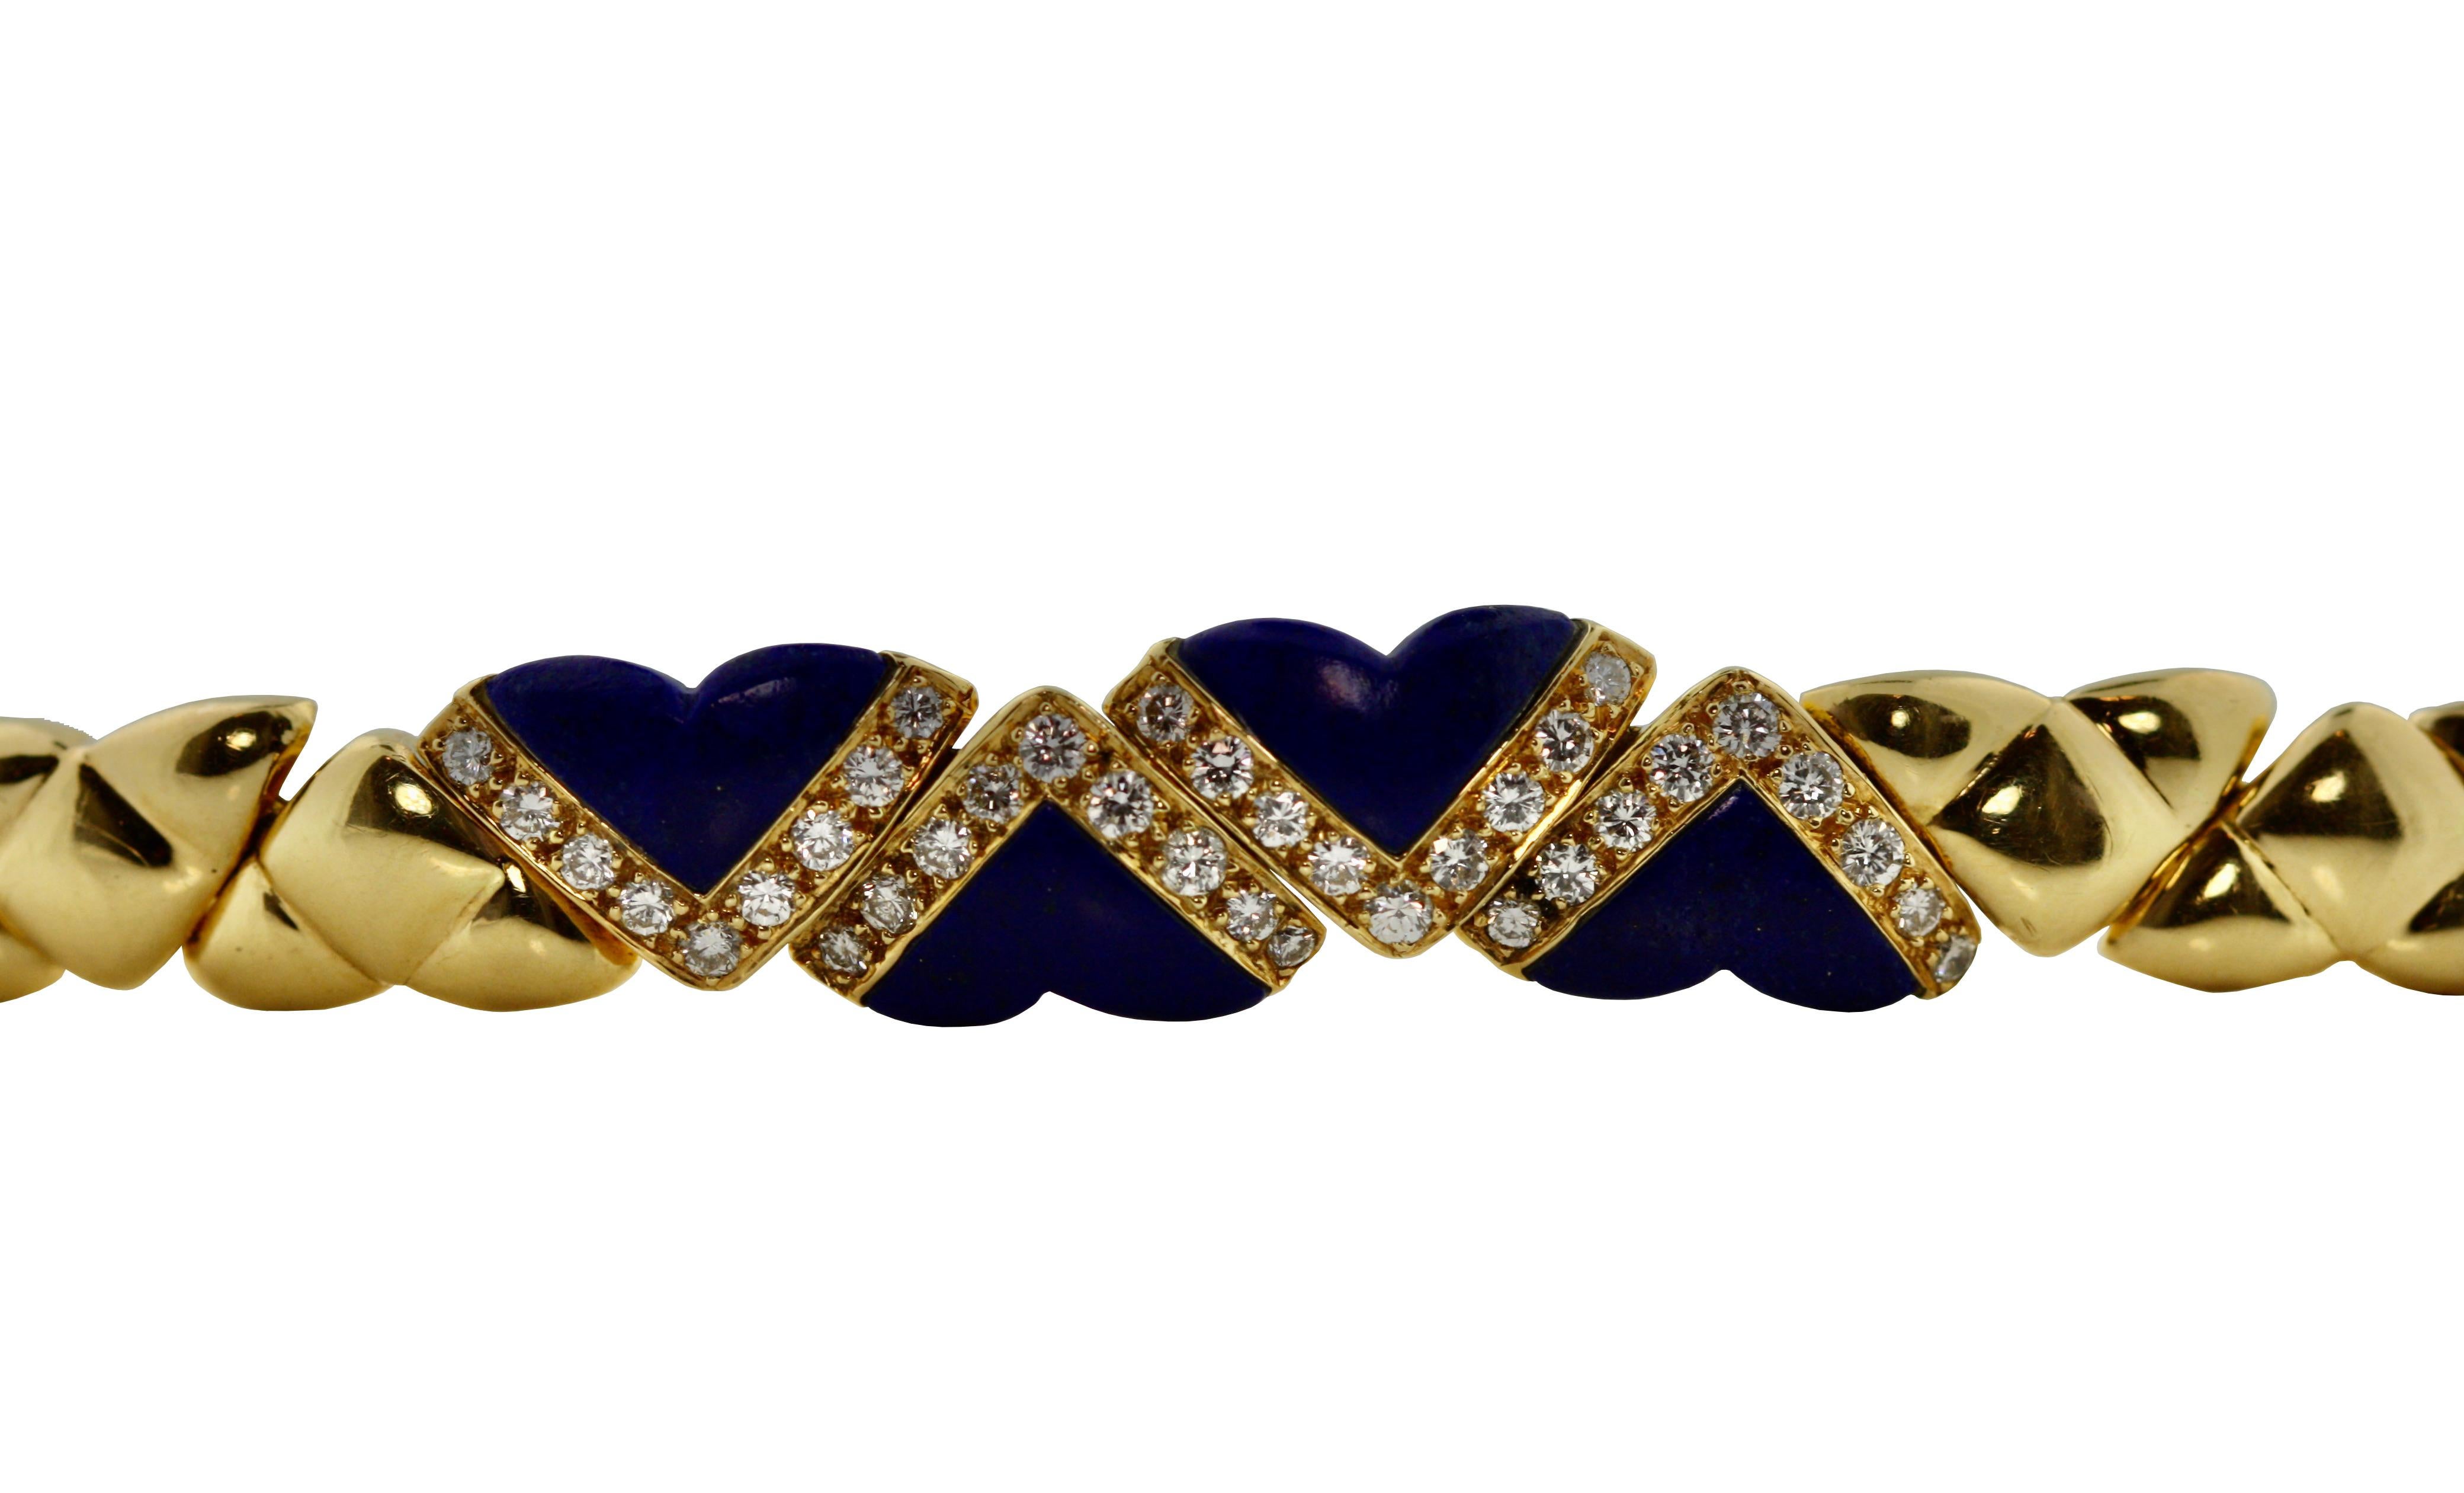 

18 Karat Gold, Lapis and Diamond Bracelet, 
Fred, Paris
Composed of V-shaped links set with round and single-cut diamonds weighing approximately 1.10 carats, gross weight approximately 22 dwts,
length 6 1/2 inches, 
signed Fred Paris.
